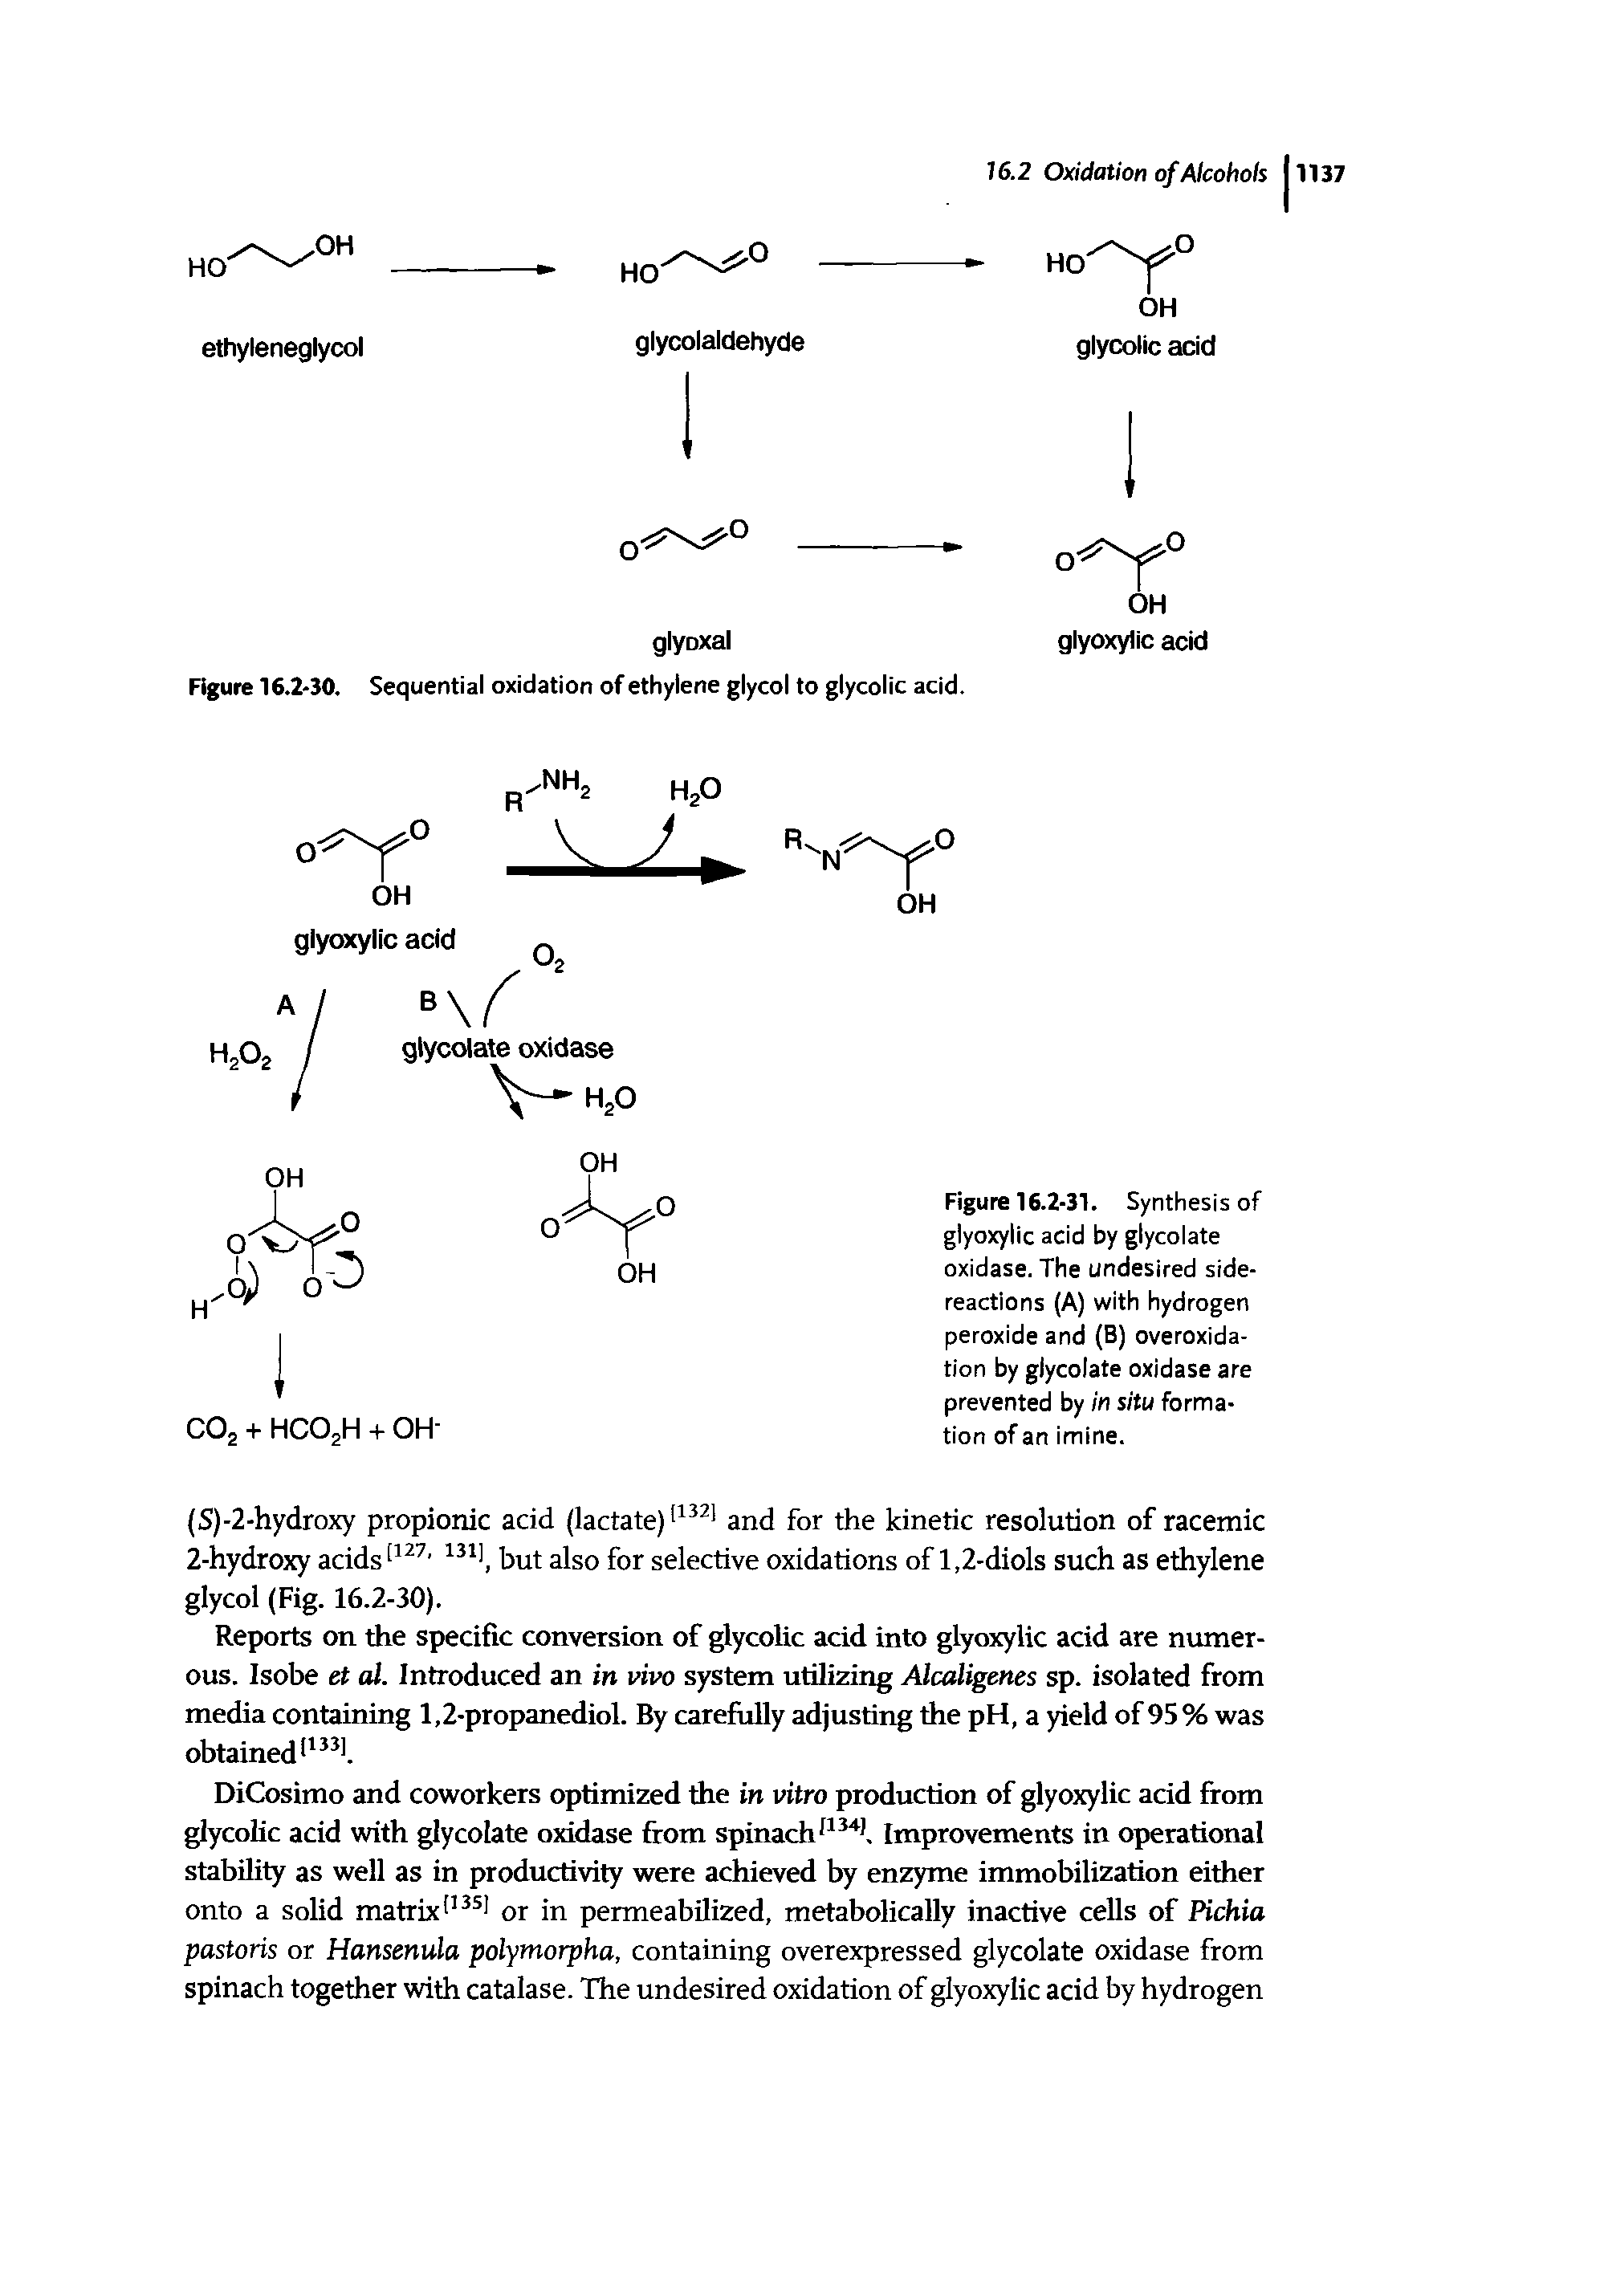 Figure 16.2-31. Synthesis of glyoxylic acid by glycolate oxidase. The undesired side-reactions (A) with hydrogen peroxide and (B) overoxidation by glycolate oxidase are prevented by in situ formation of an imine.